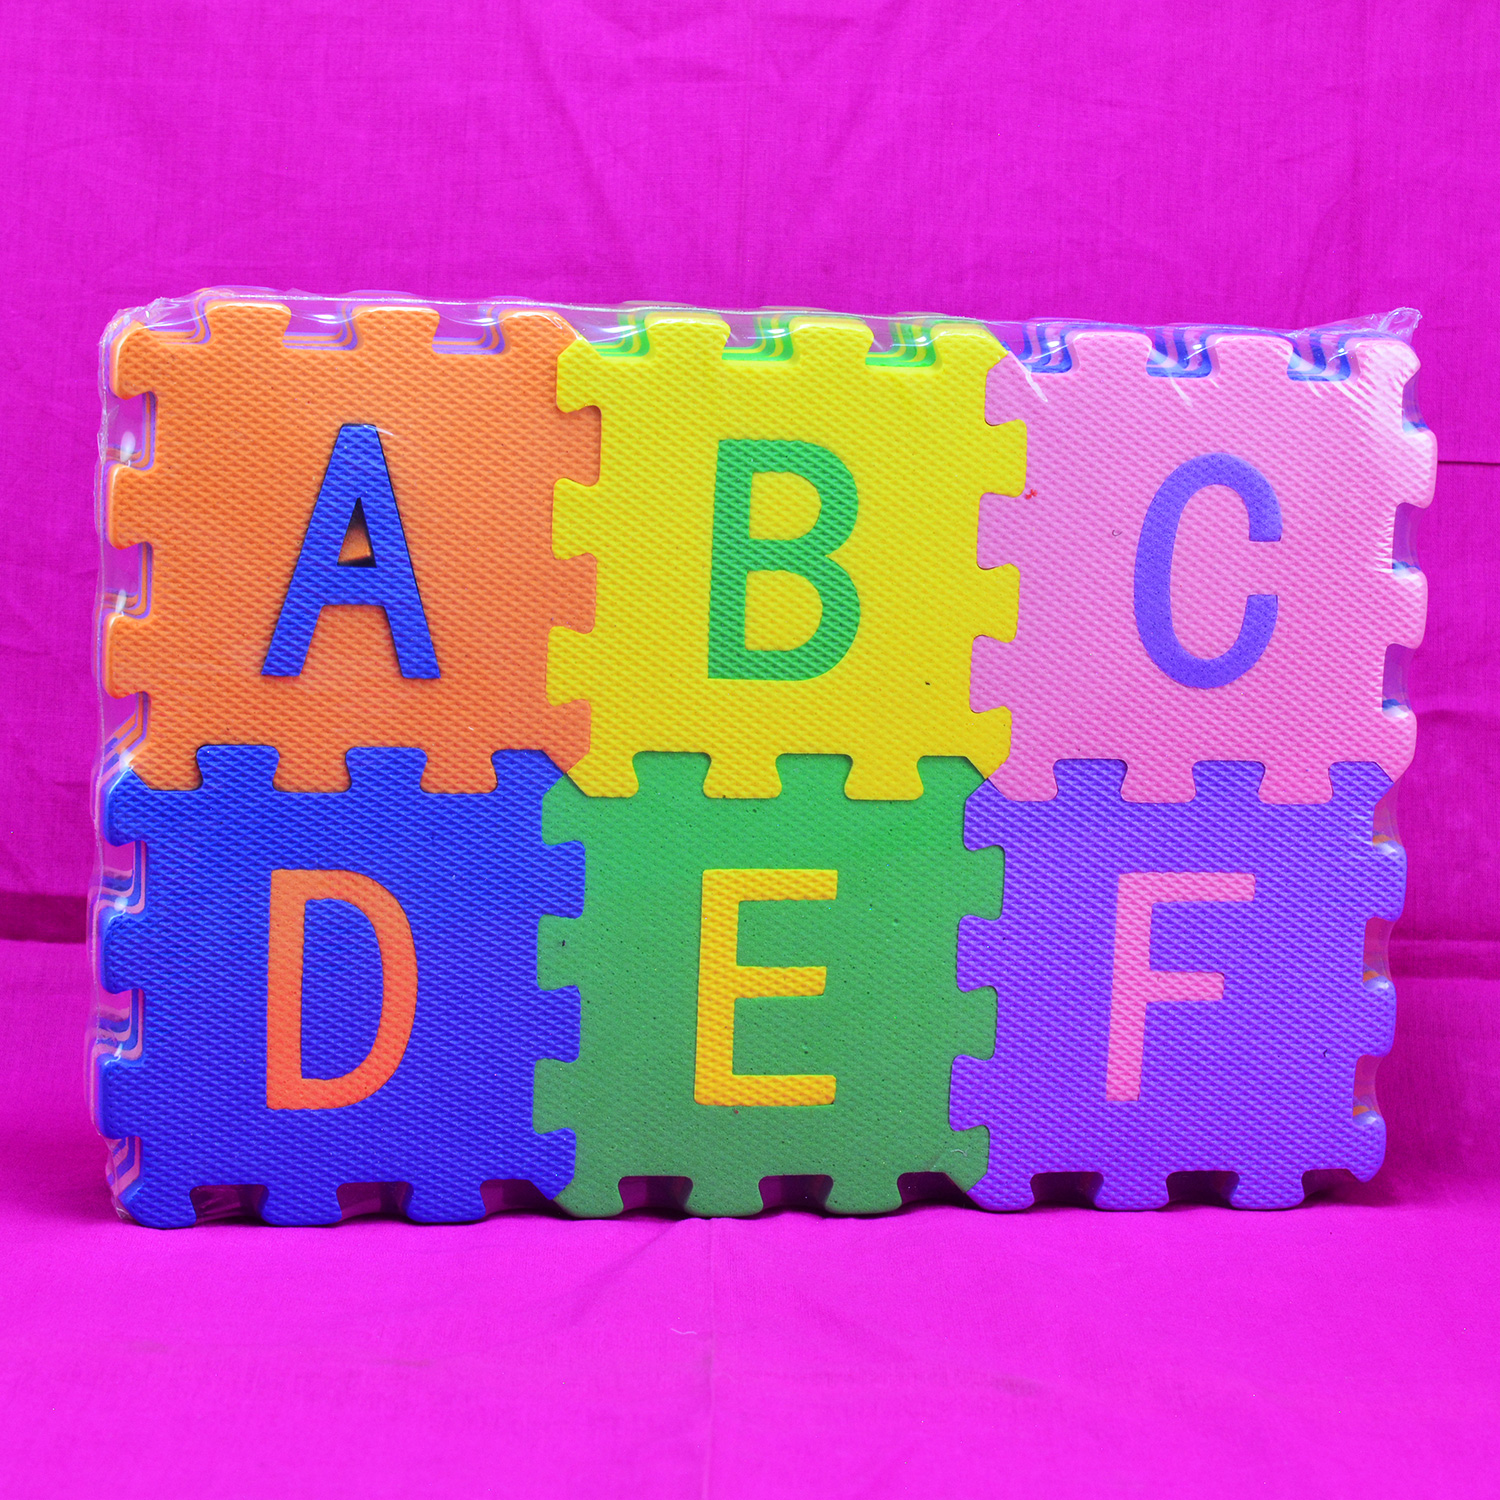 New Studying Game of Alphabets for Kids